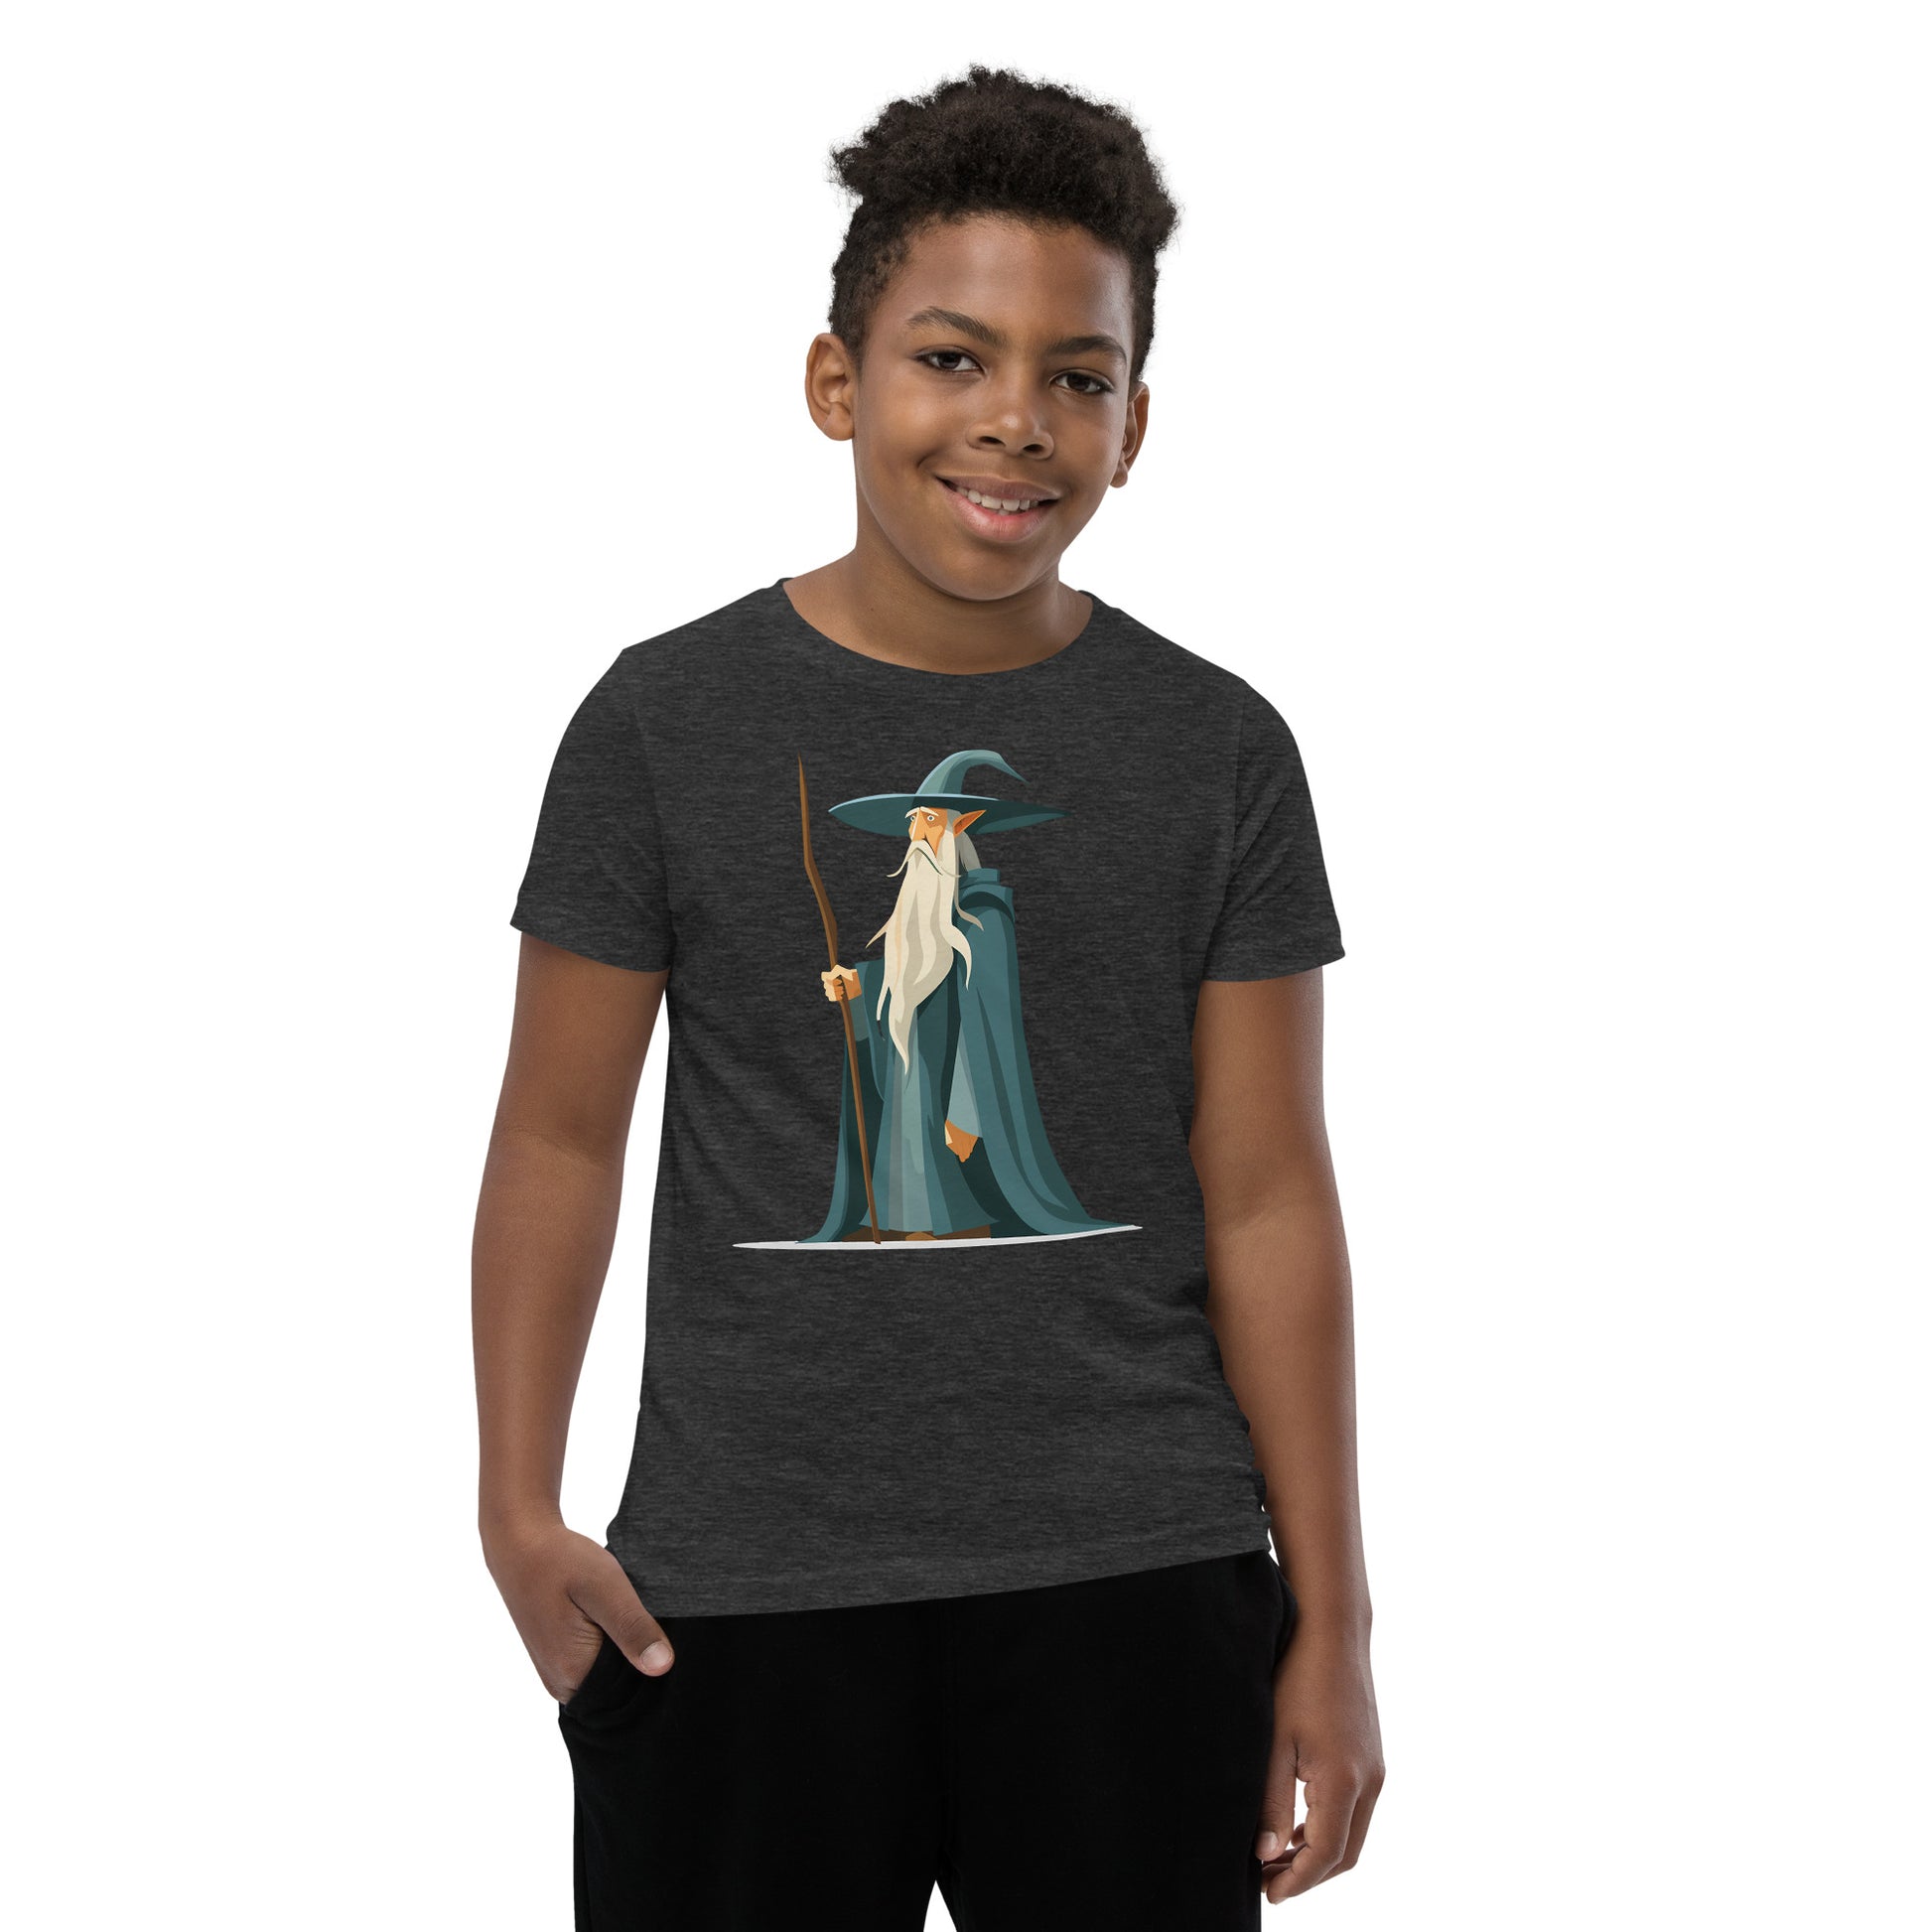 Boy with a dark grey T-shirt with a picture of a magician